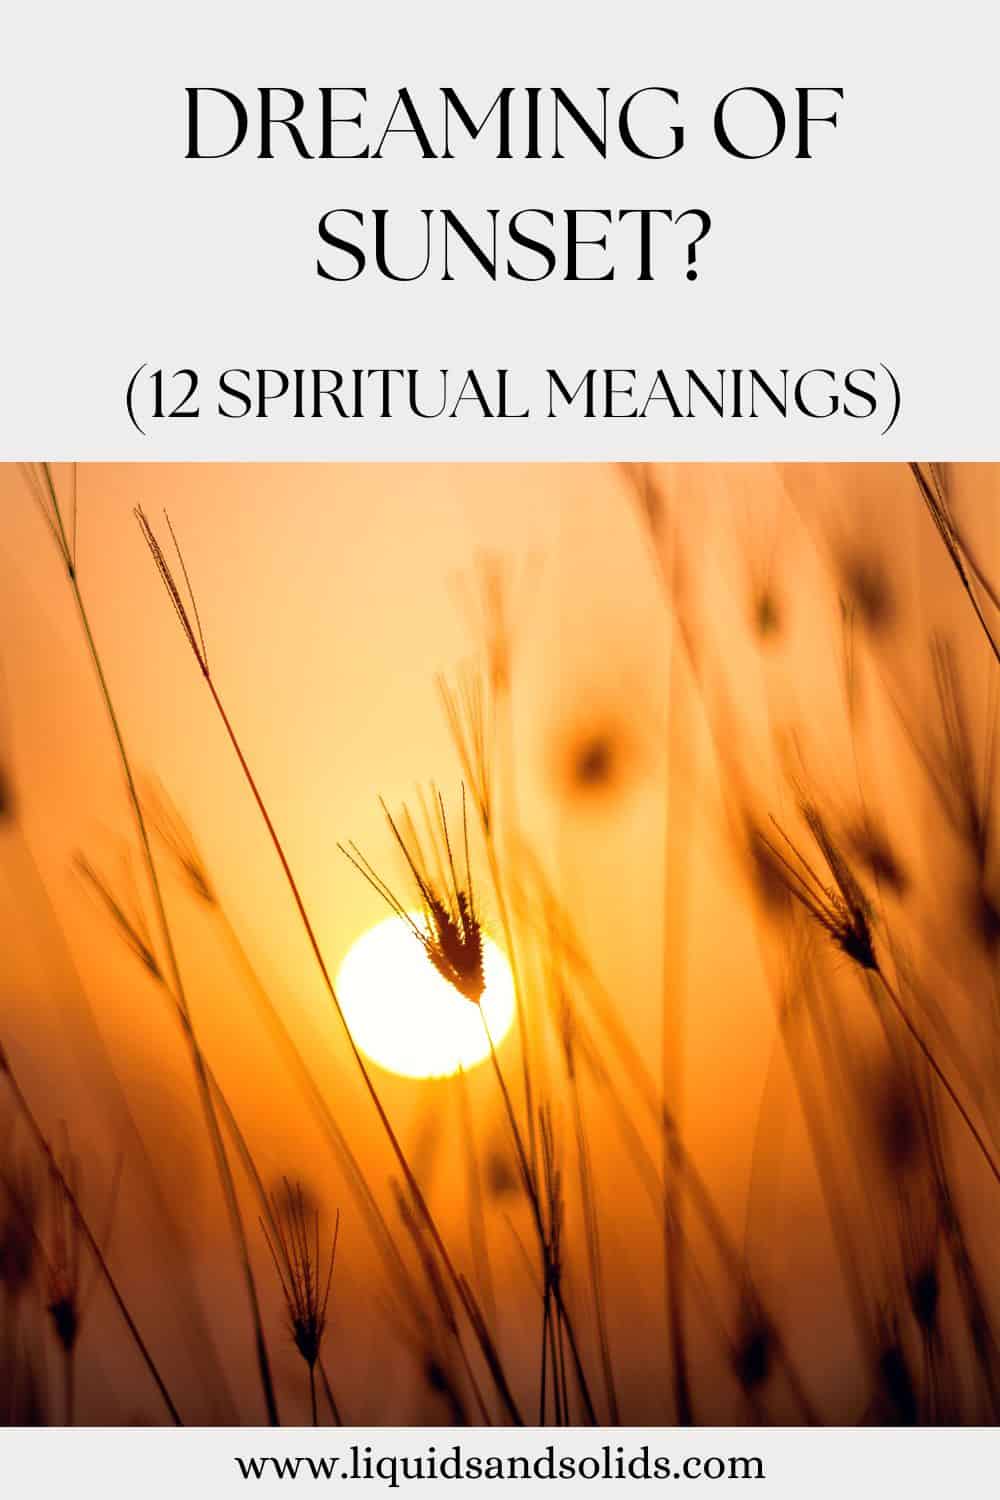 Dreaming Of Sunset? (12 Spiritual Meanings)